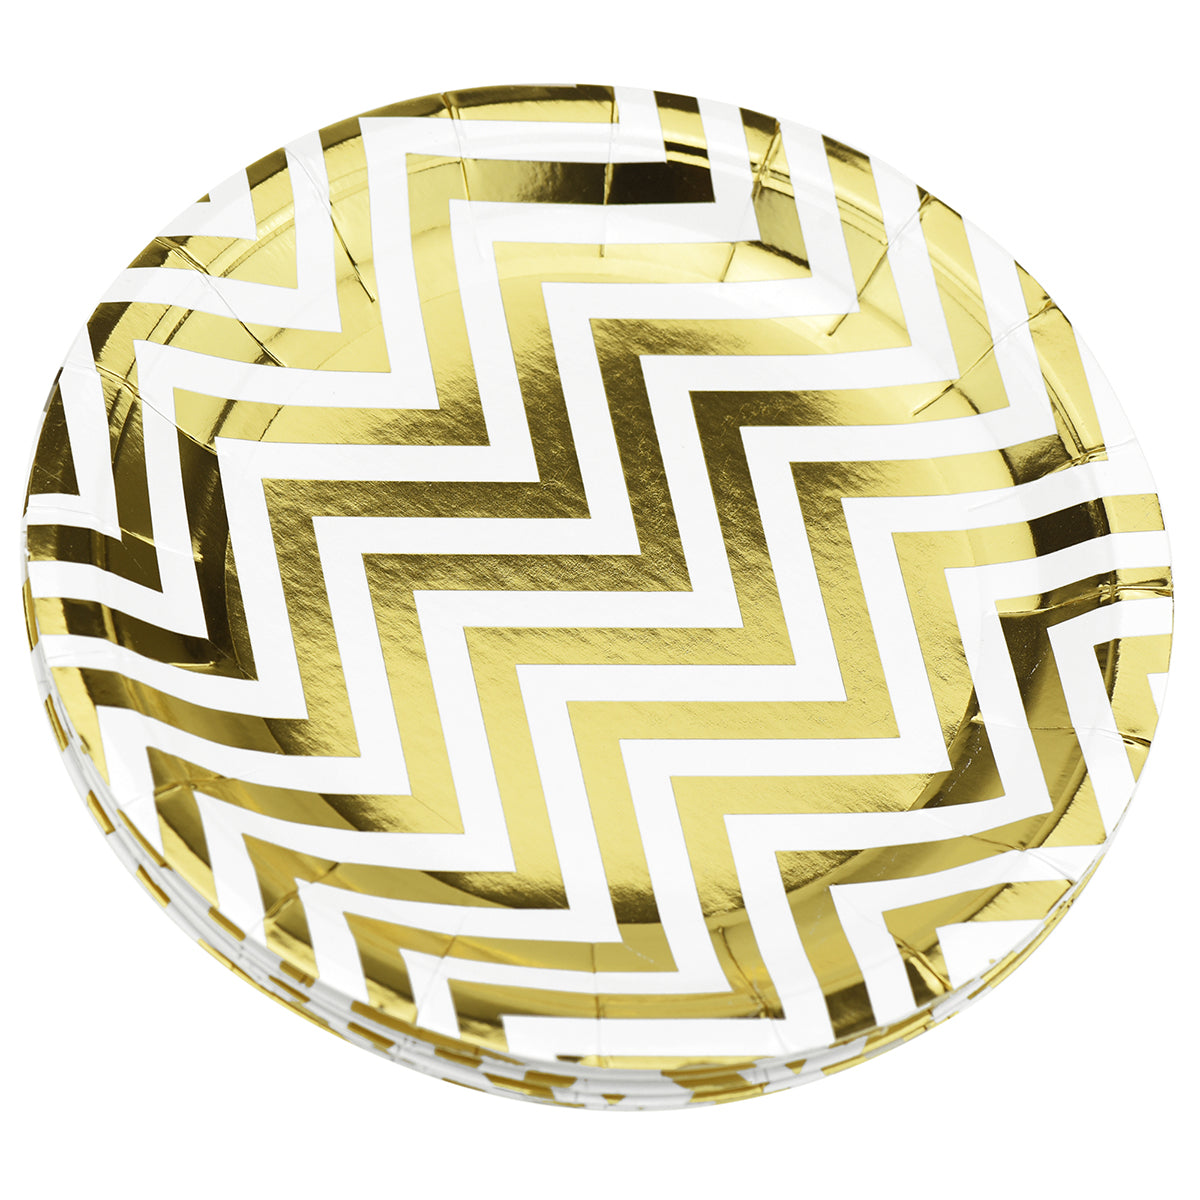 16 stacked large white and gold zigzag design round paper plates display with a white background